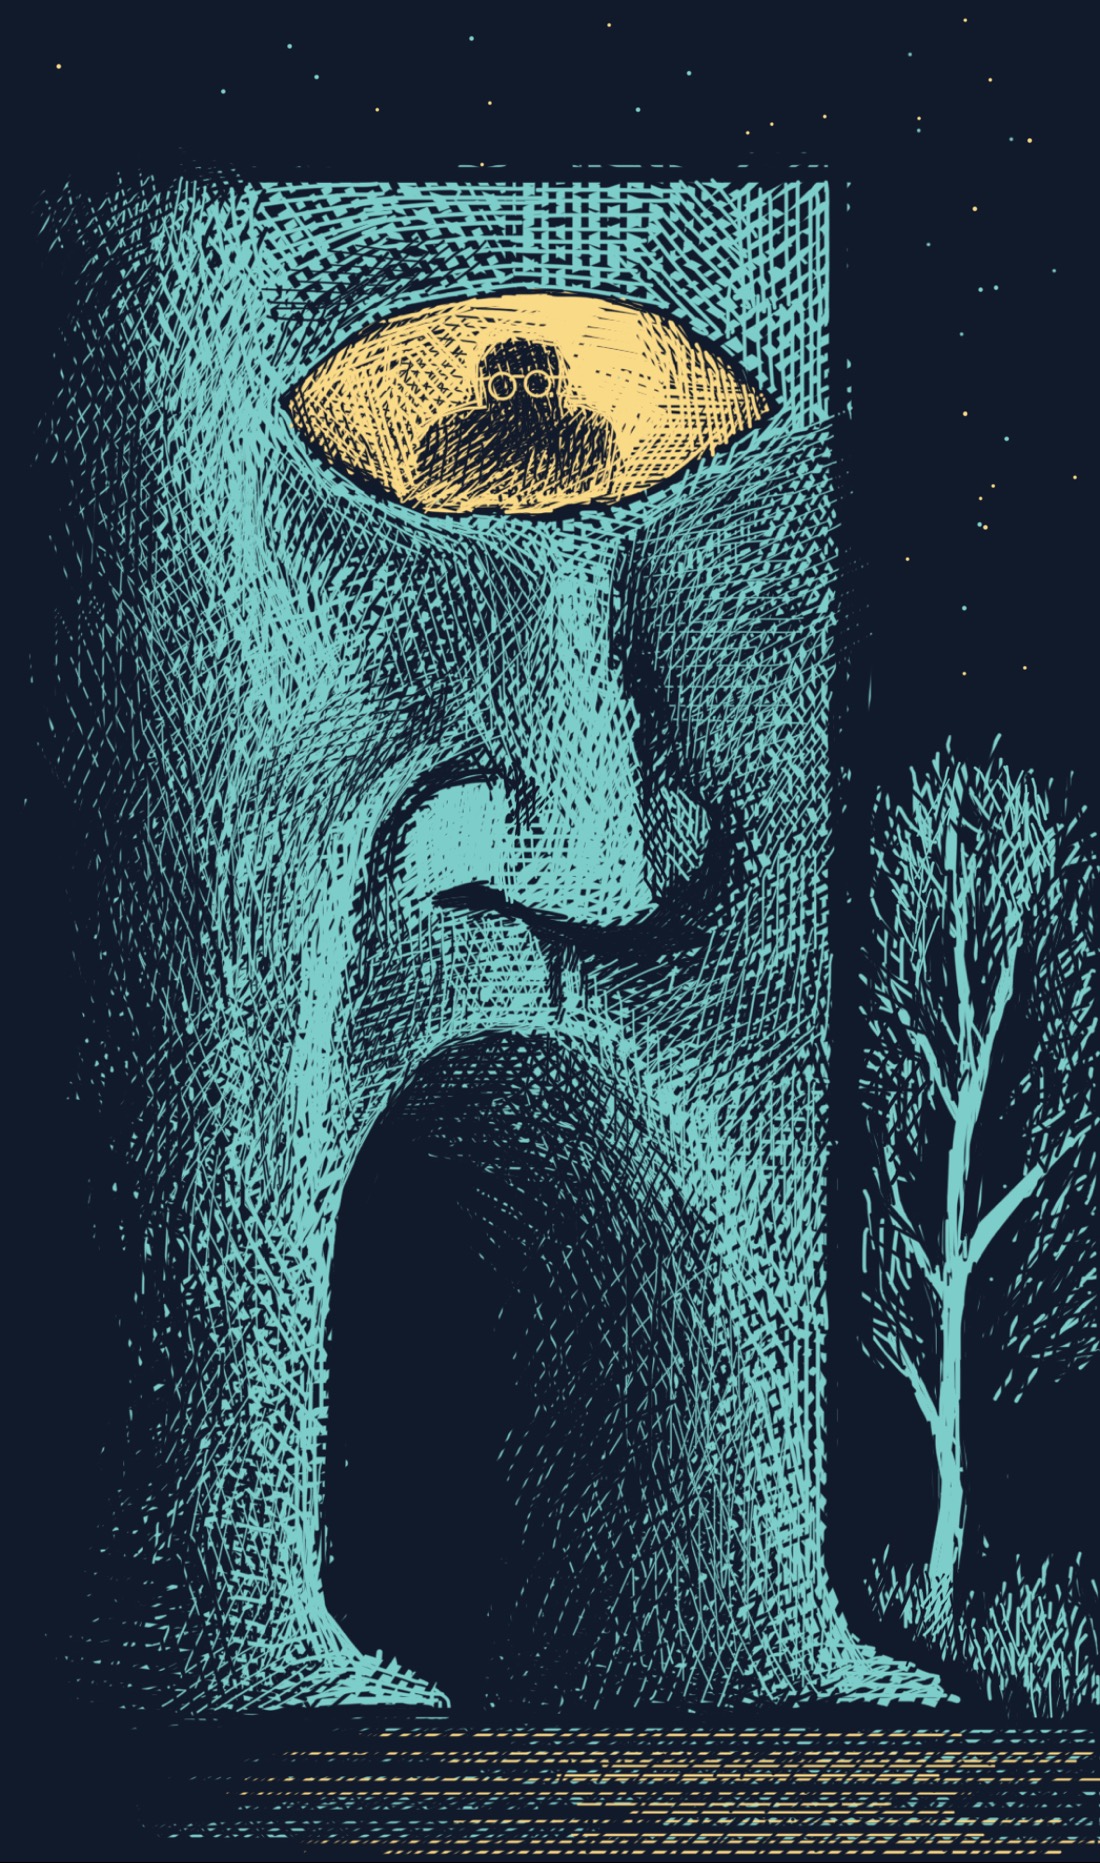 A large face with one eye and a mouth like the opening of a tunnel, framed by two legs. The eye appears to be a window, with a person looking out of it. It's night.